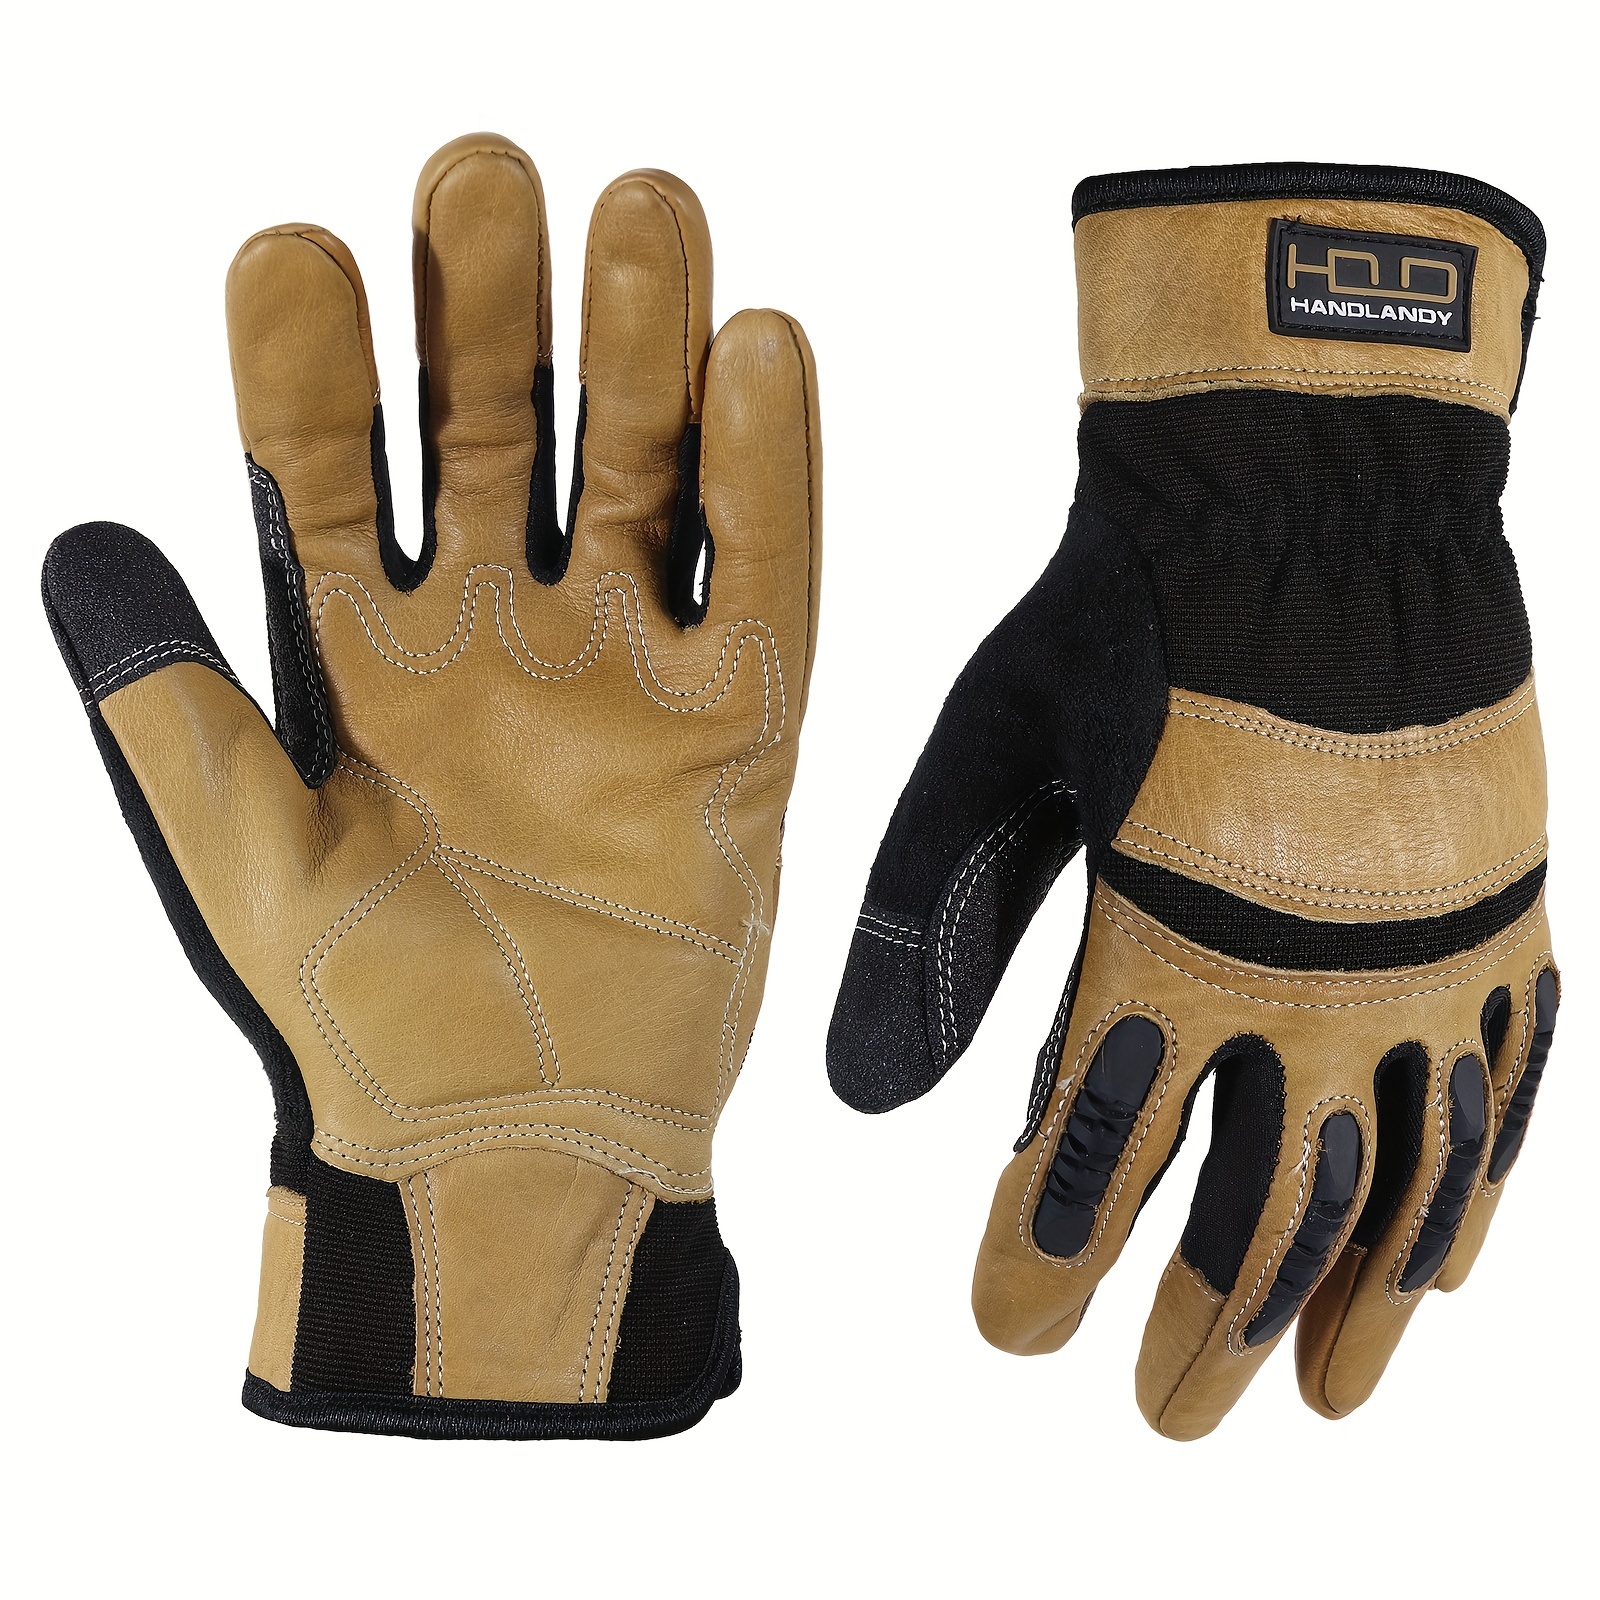 Cowhide Work Safety Gloves, Gardening, Thorn Resistance, Mechanic Work, Palm Padded, Knuckle TPR Anti-Impact Protect, Screen Touch Fingers, Multi